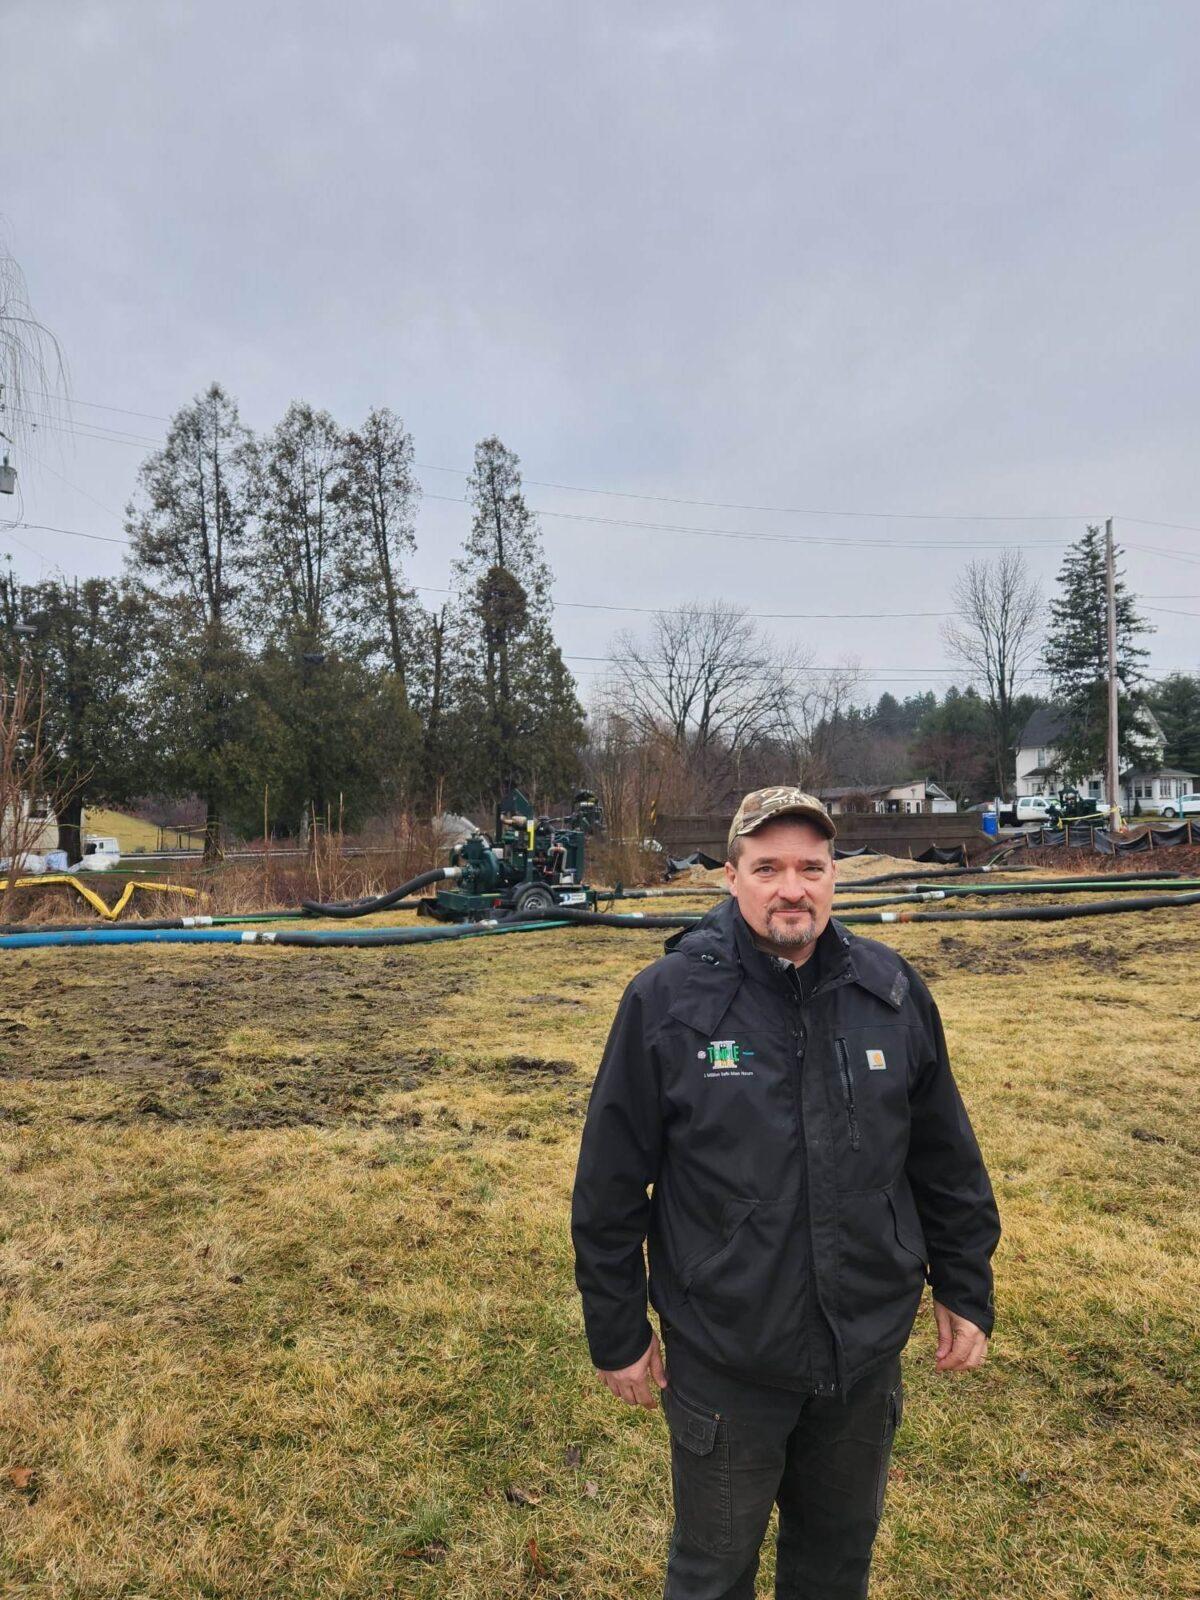 East Palestine resident Matthew Hupp lives near Sulphur Run, one of the contaminated waterways being treated after the train derailment. (Jeff Louderback/The Epoch Times)